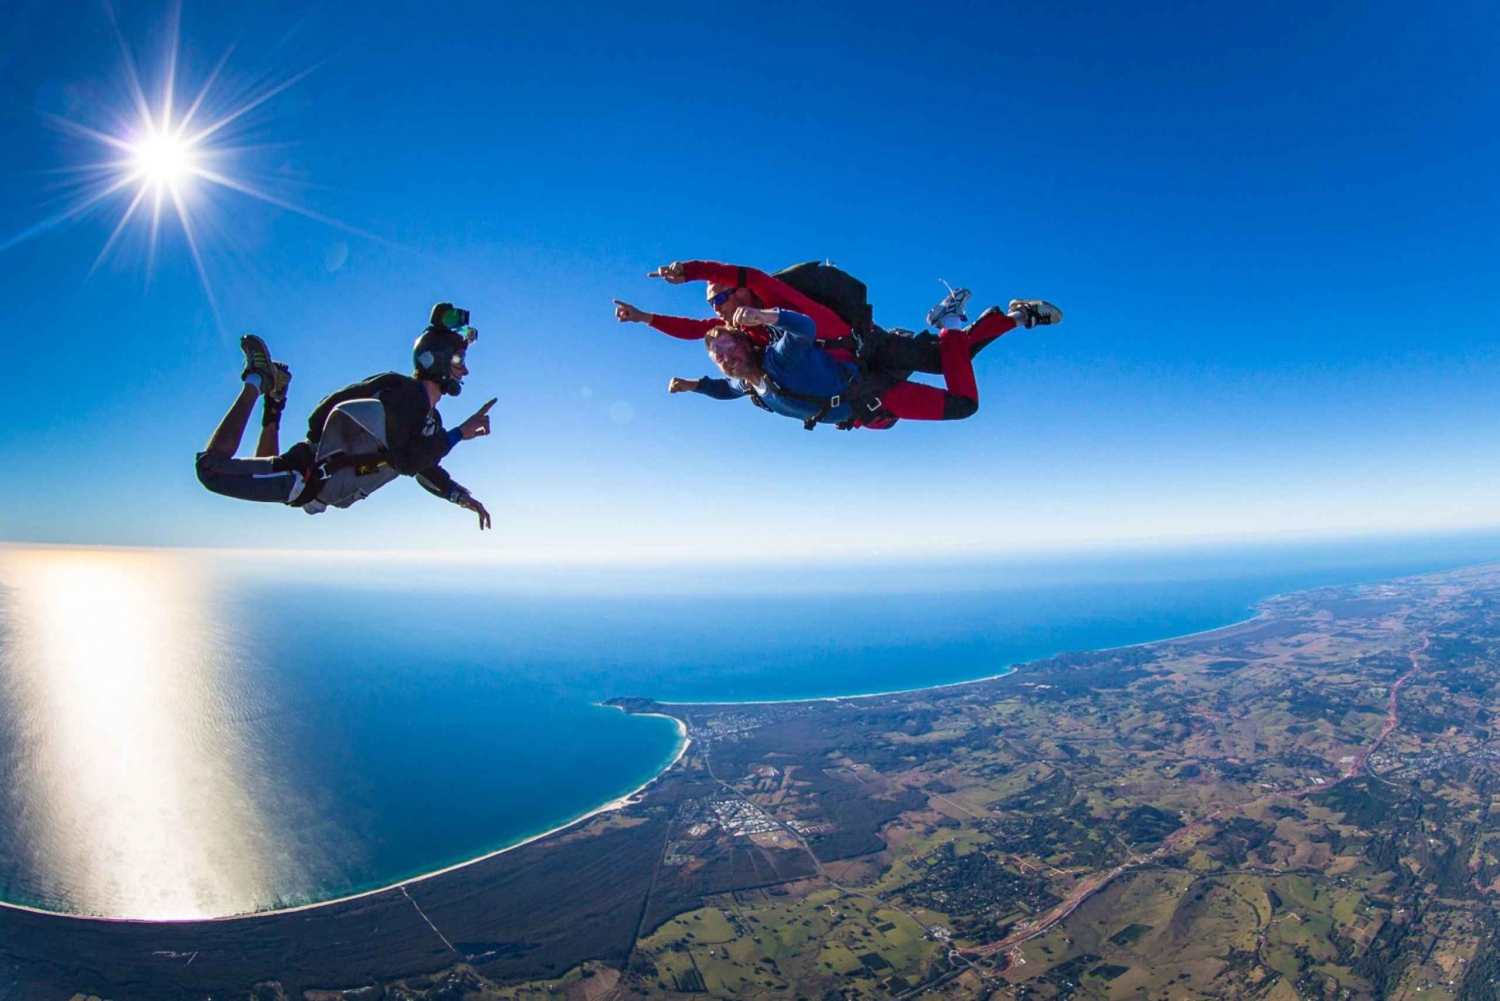 Byron Bay Tandem Skydive with Transfer Options